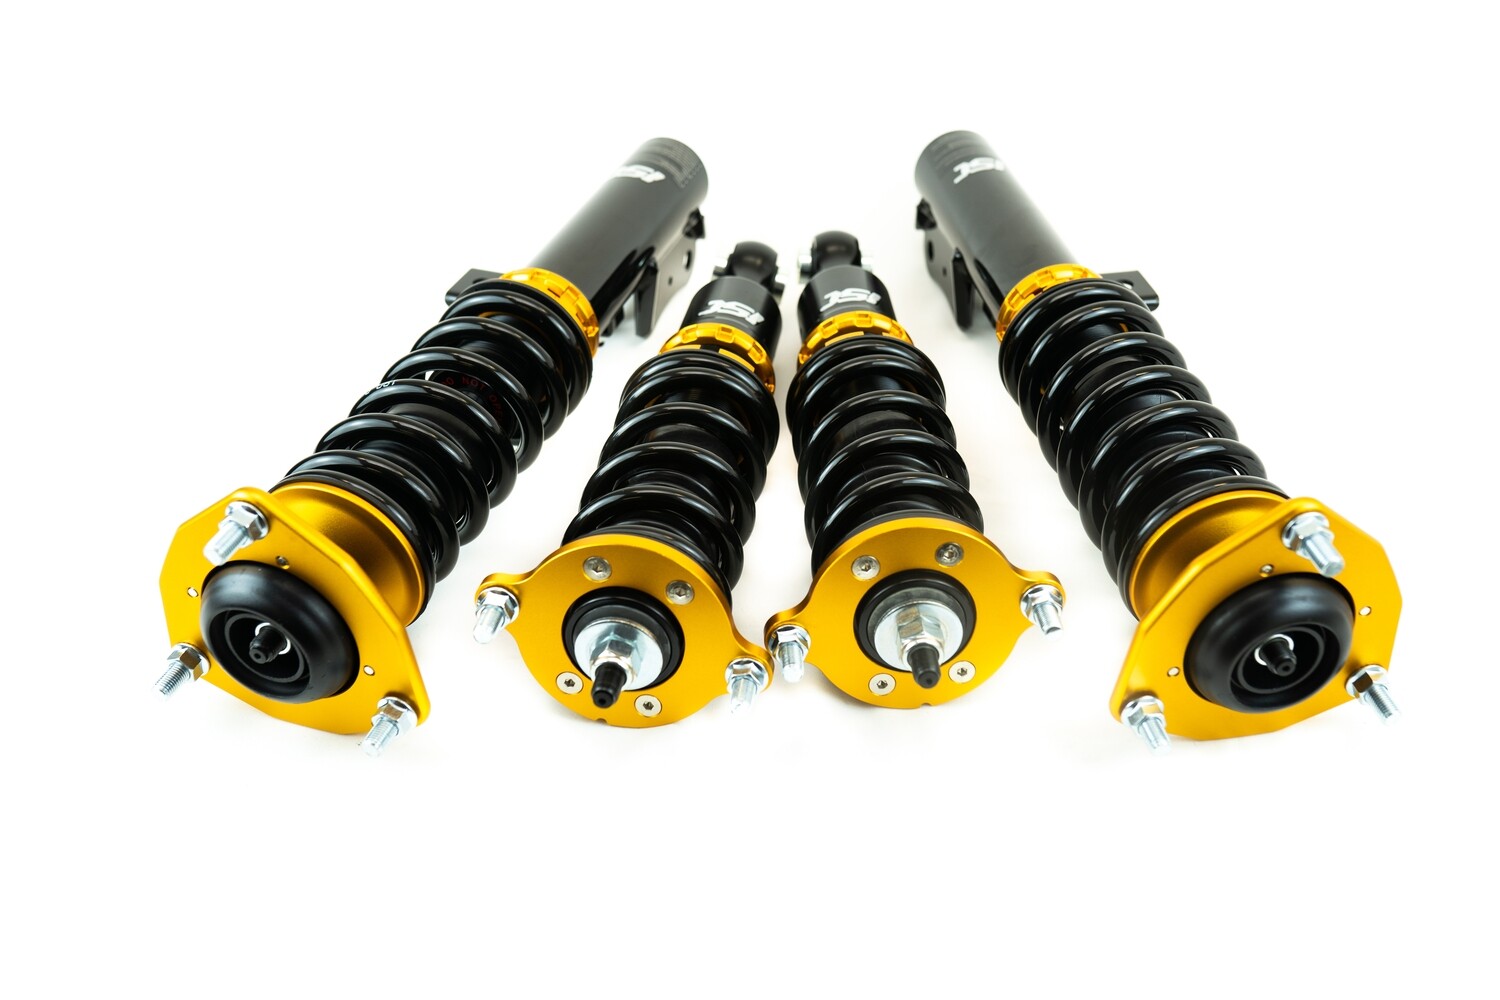 Mitsubishi Lancer 08-16 ISC V2 Basic Coilover Suspension With Coilover Covers